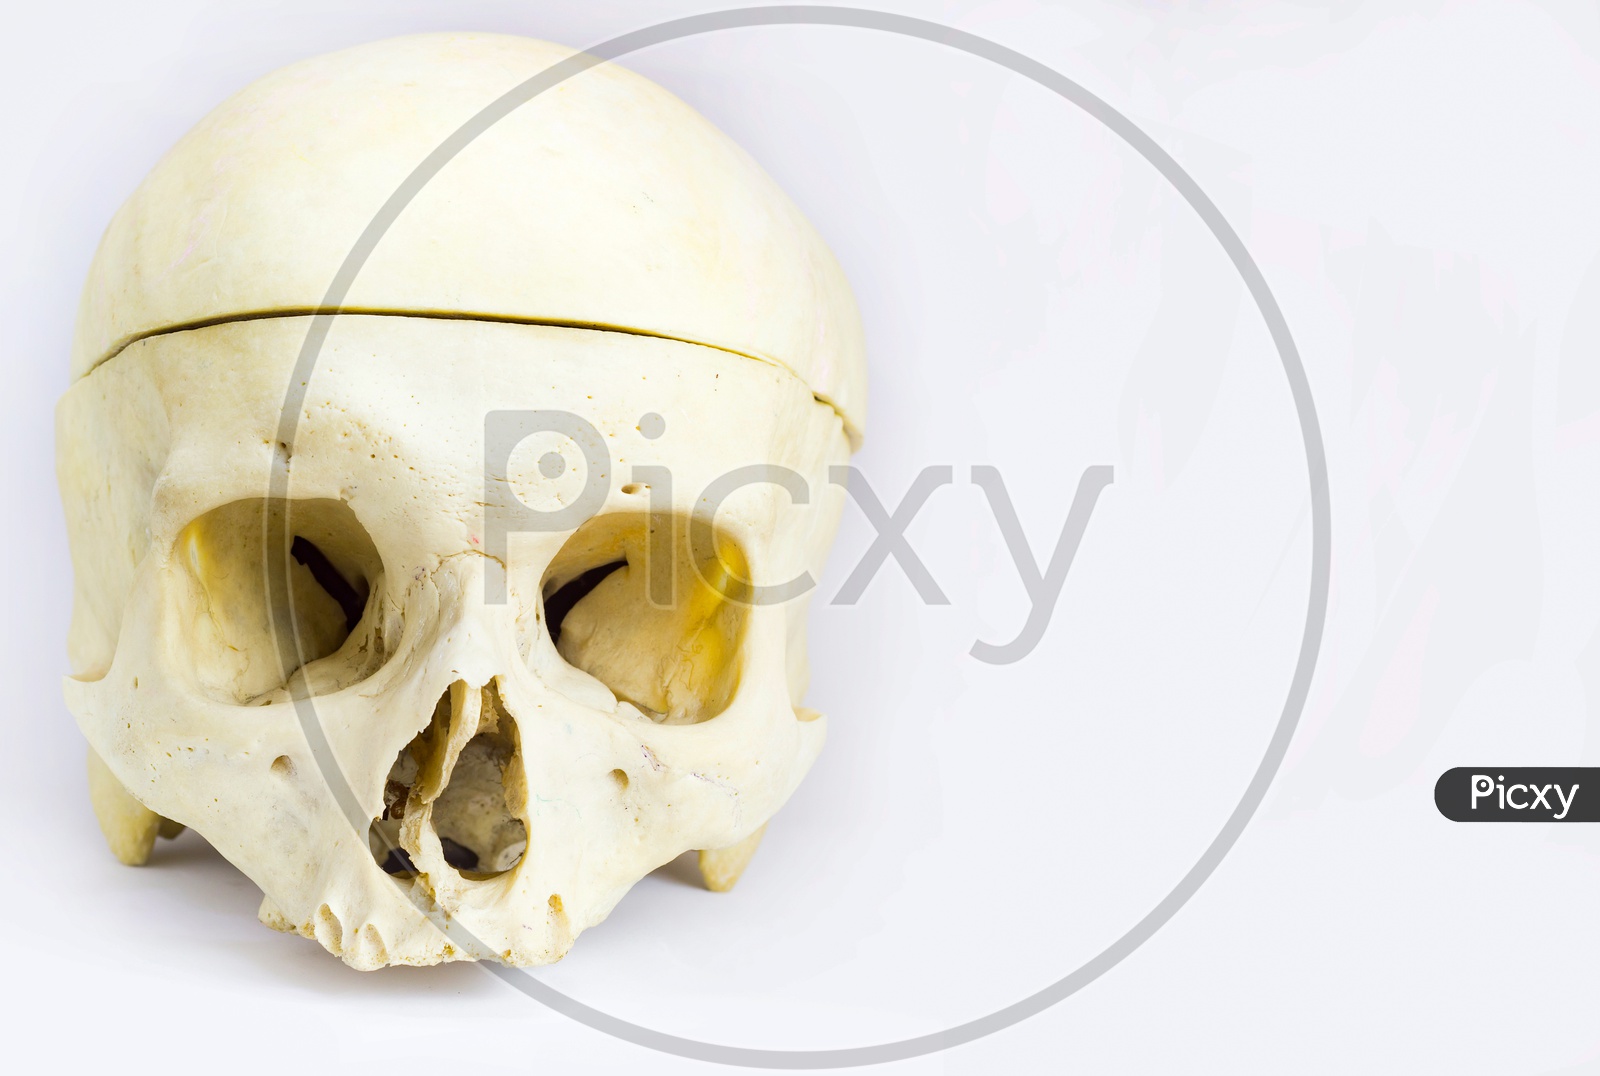 Front Anatomical View Of Human Skull Bone With The Vault Of The Skull Separated By Saw And Without Mandible In Isolated White Background With Space For Text